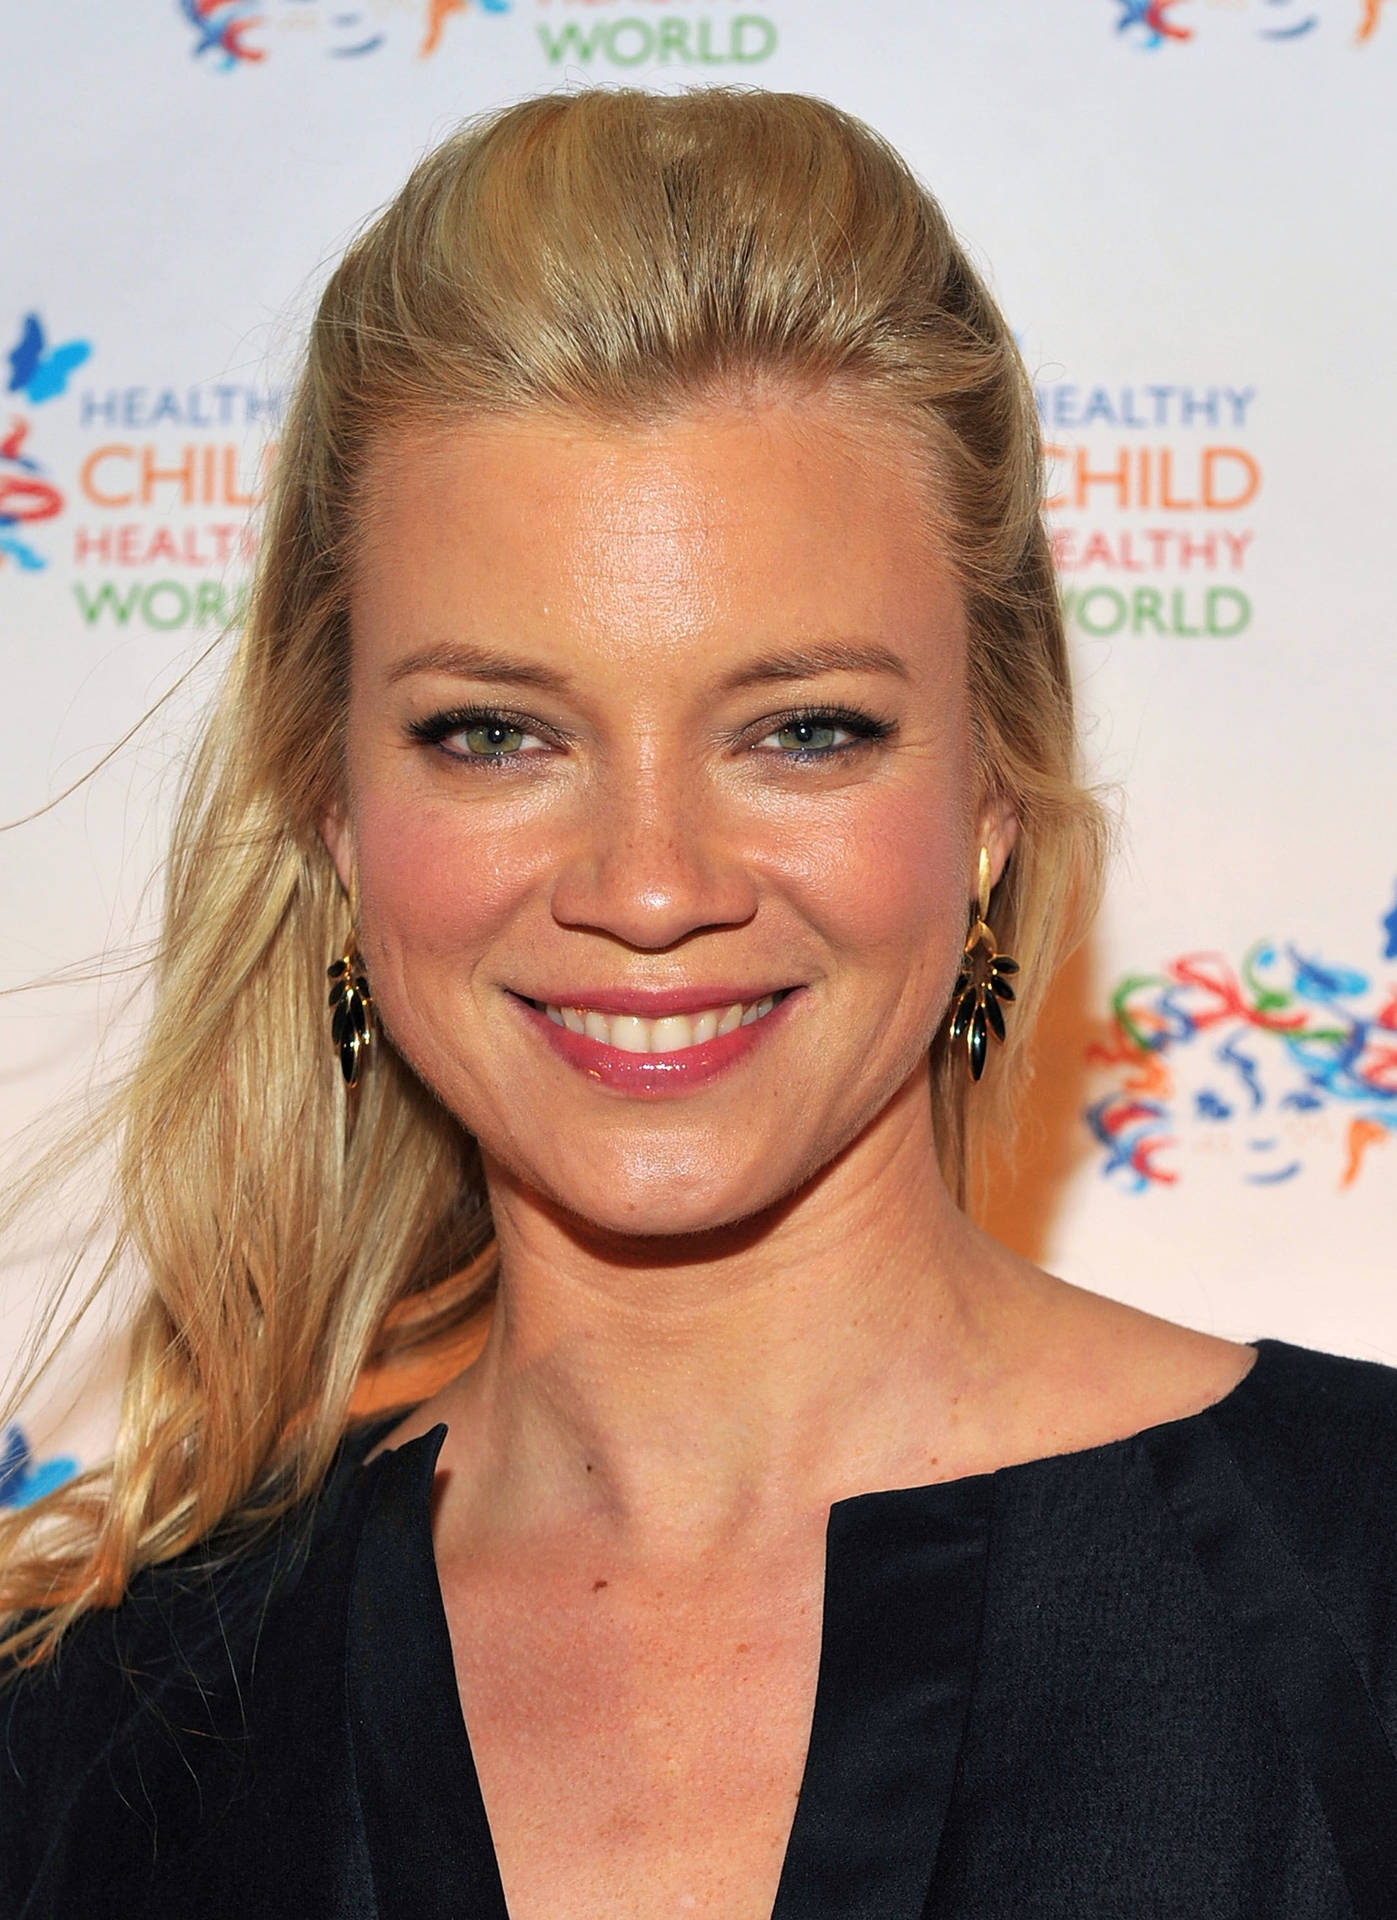 Amy Smart promoting Healthy Child, Healthy World Wallpaper